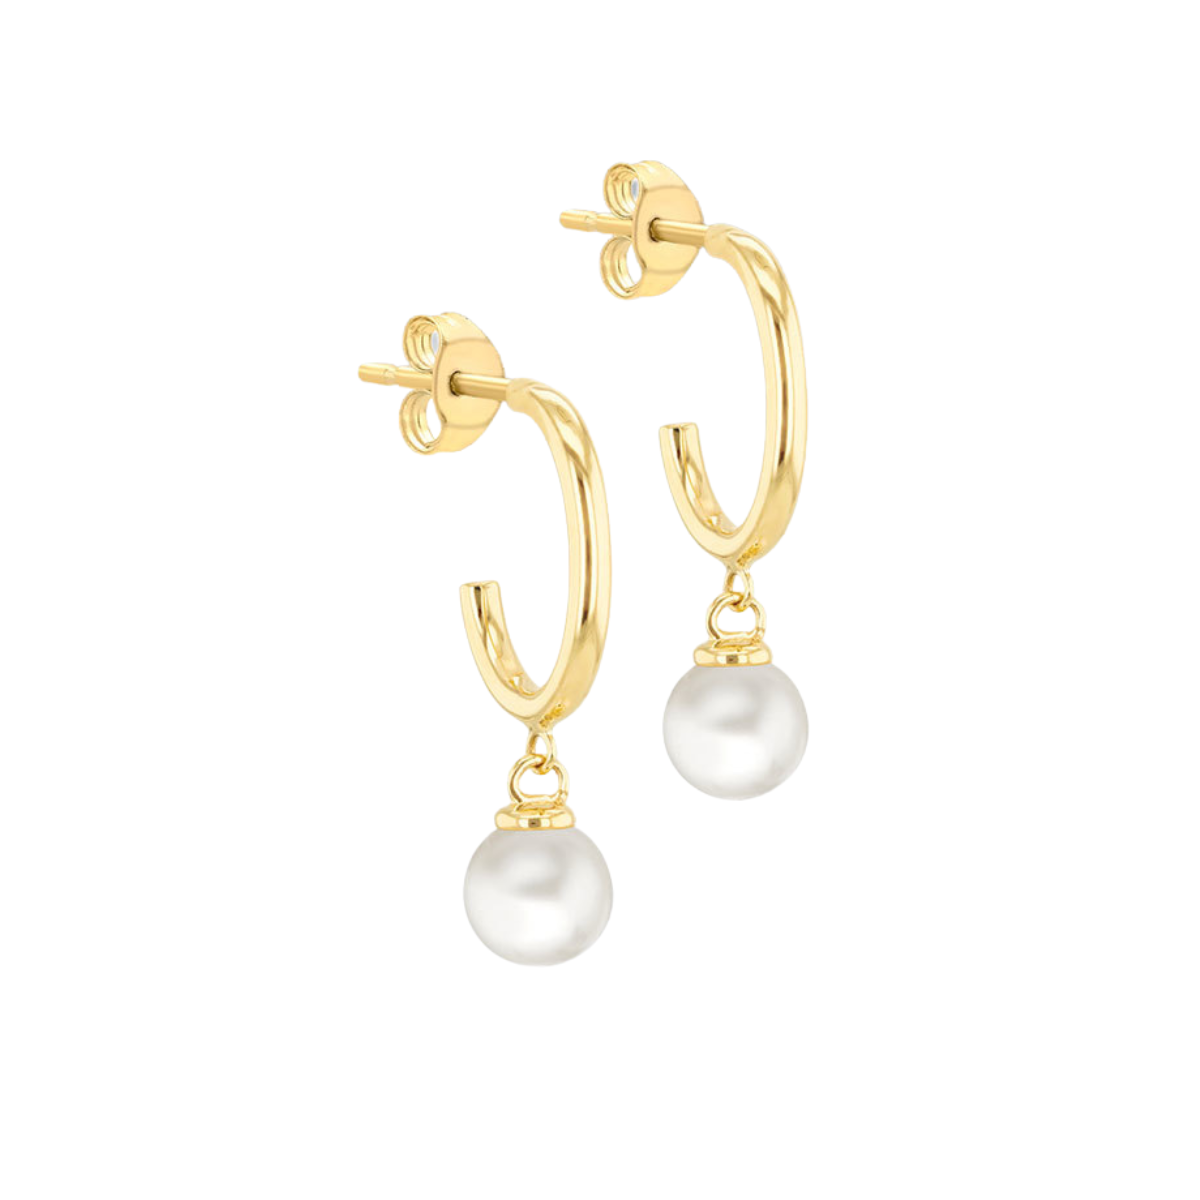 9 Carat Freshwater Pearl Drop Earrings - Elegant and Sophisticated Perfect for Formal and Casual Outfits